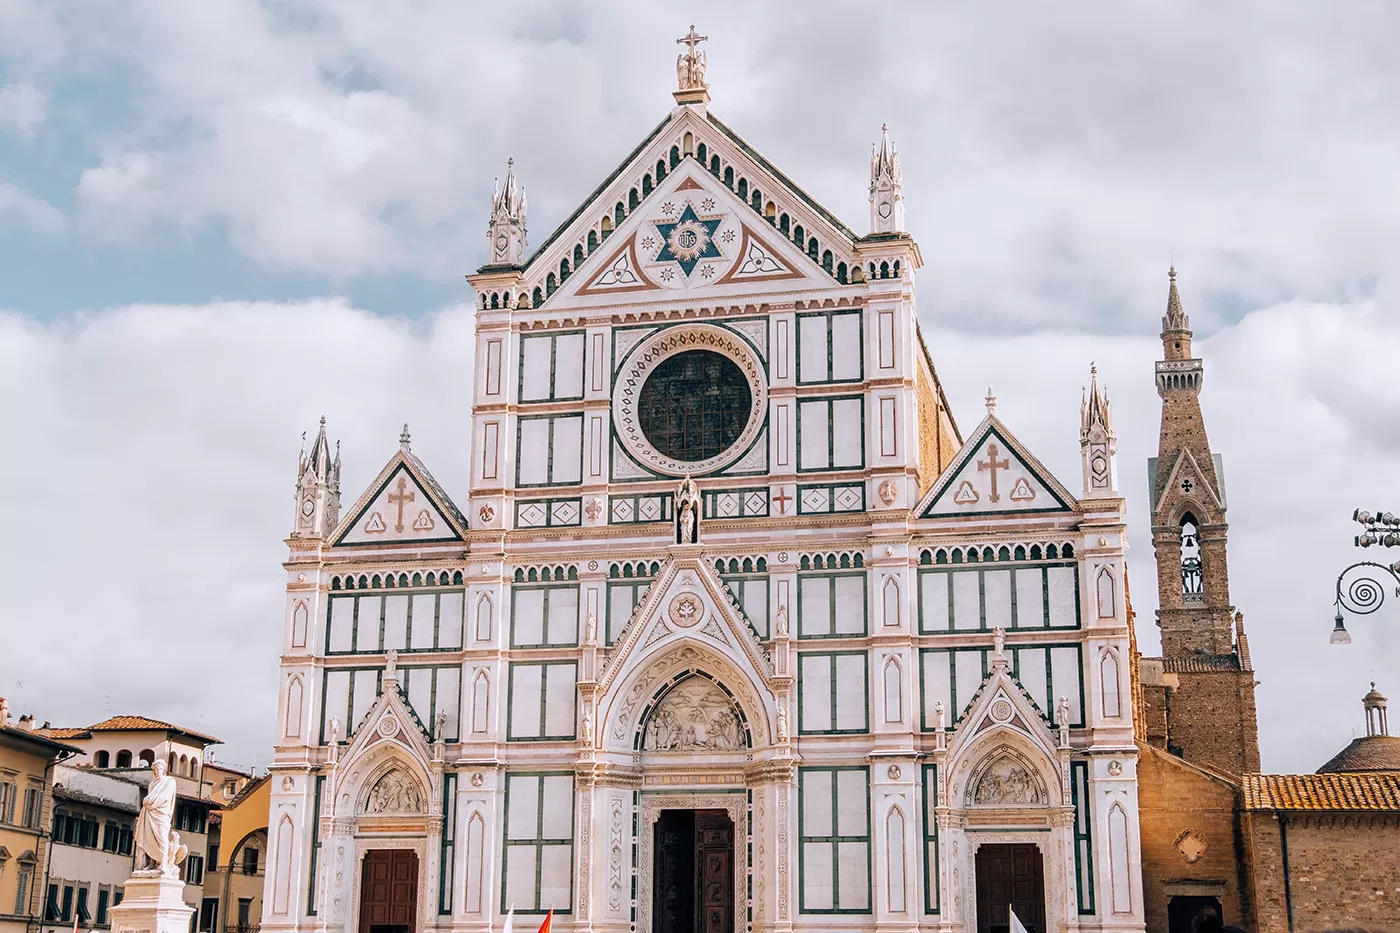 Where to Stay in Florence - Basilica of Santa Croce in Florence